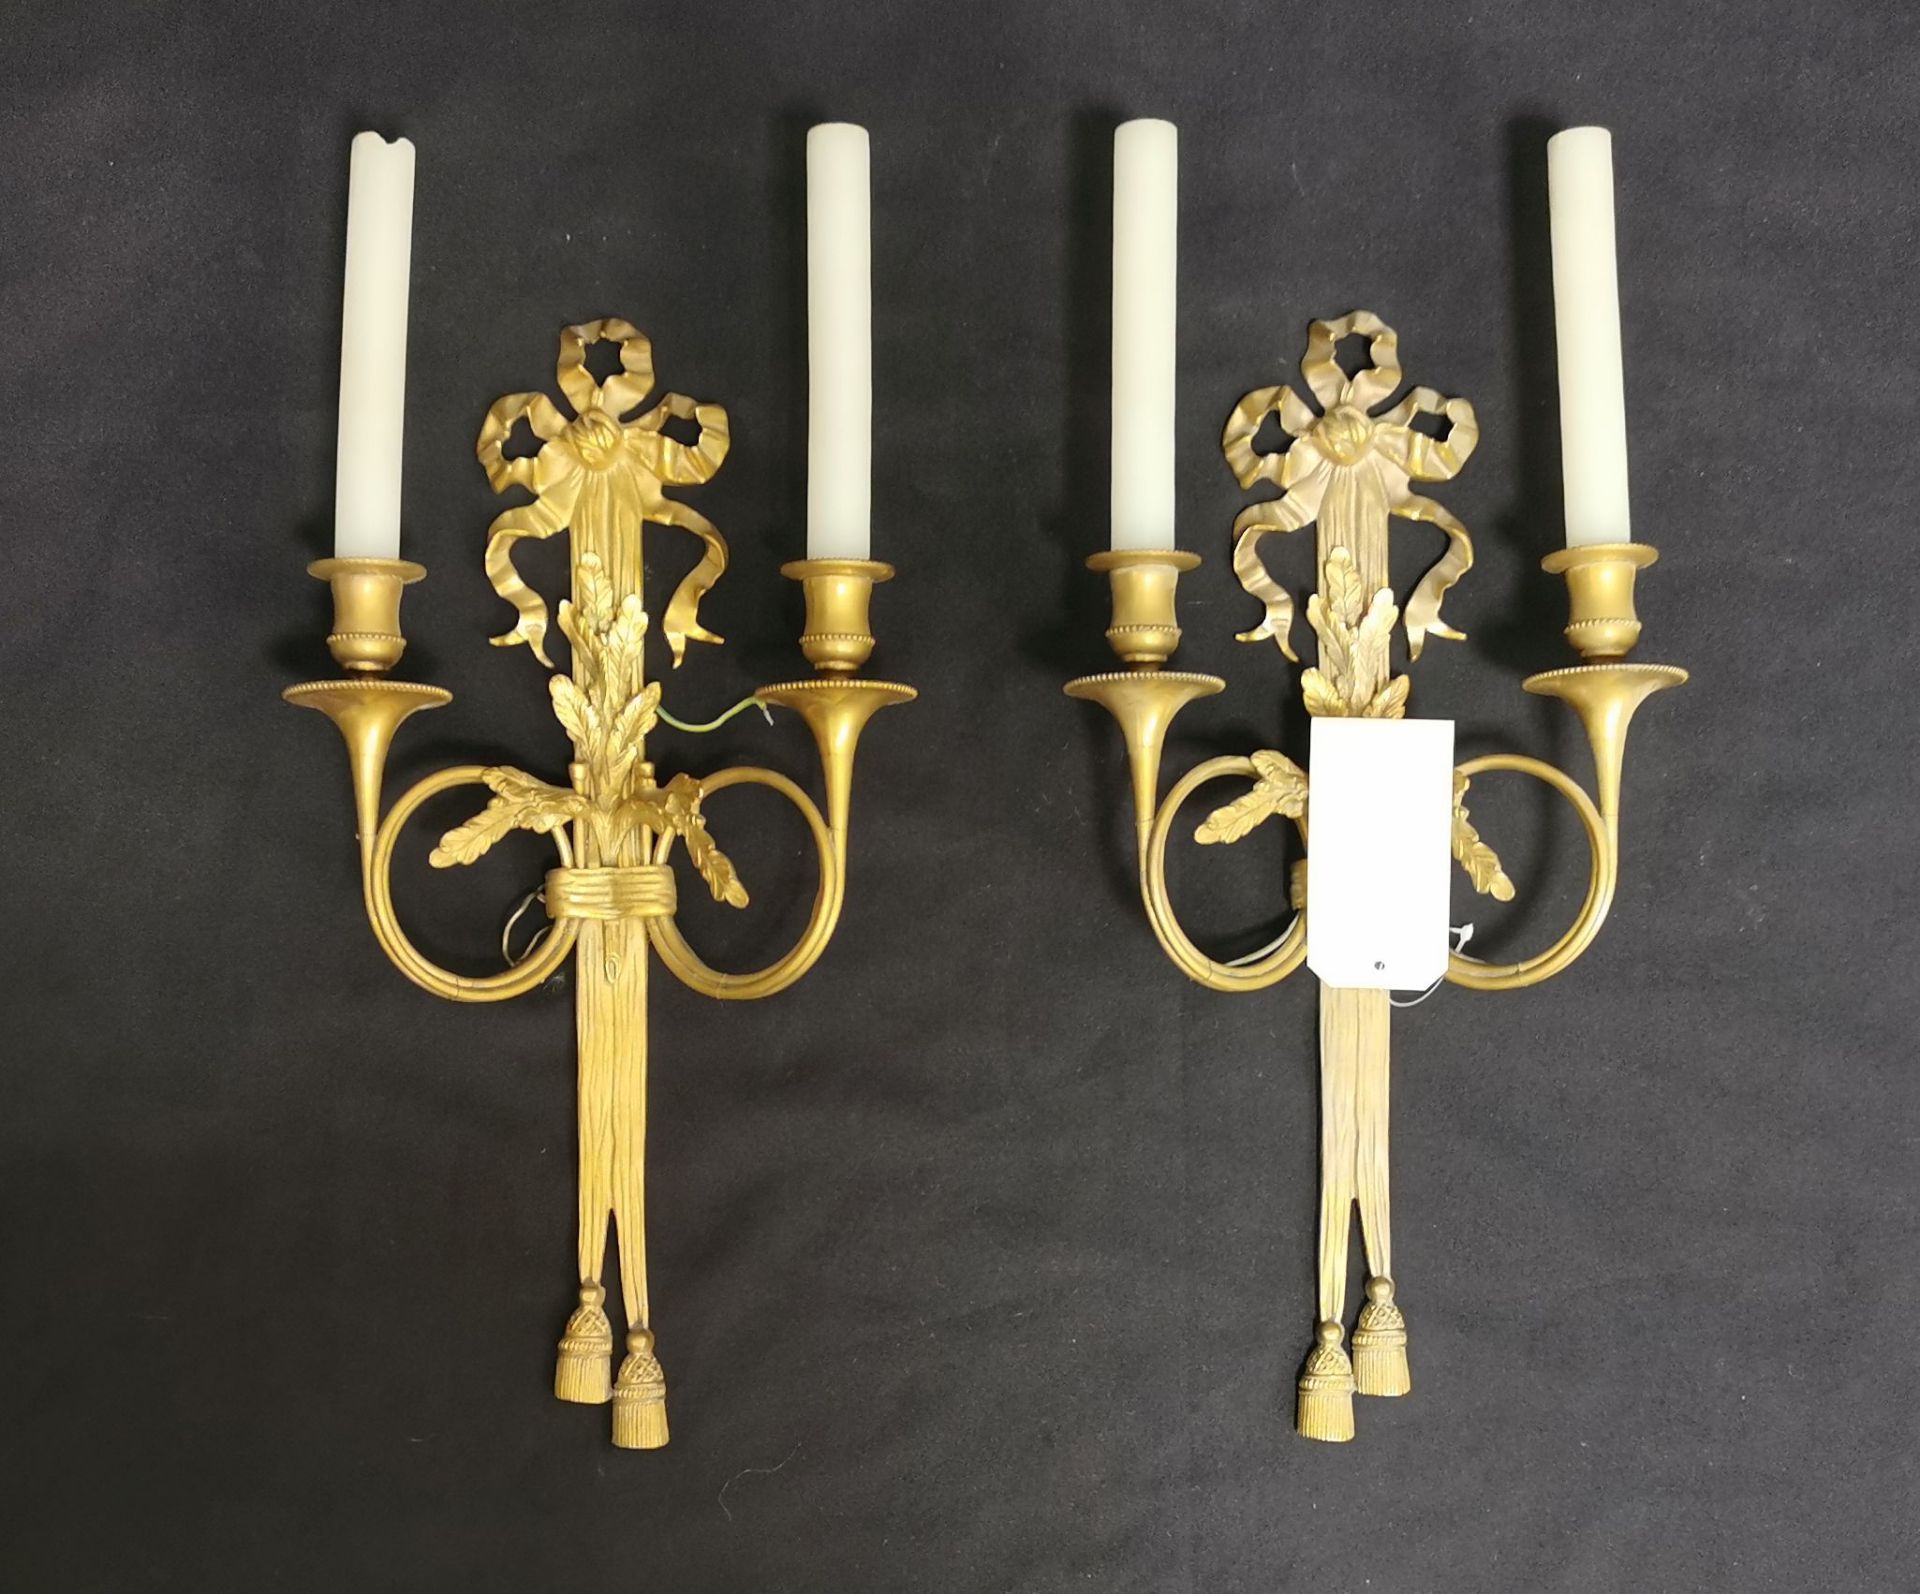 PAIR OF TWO-FLAME SCONCES IN THE FORMAL LANGUAGE OF THE EMPIRE